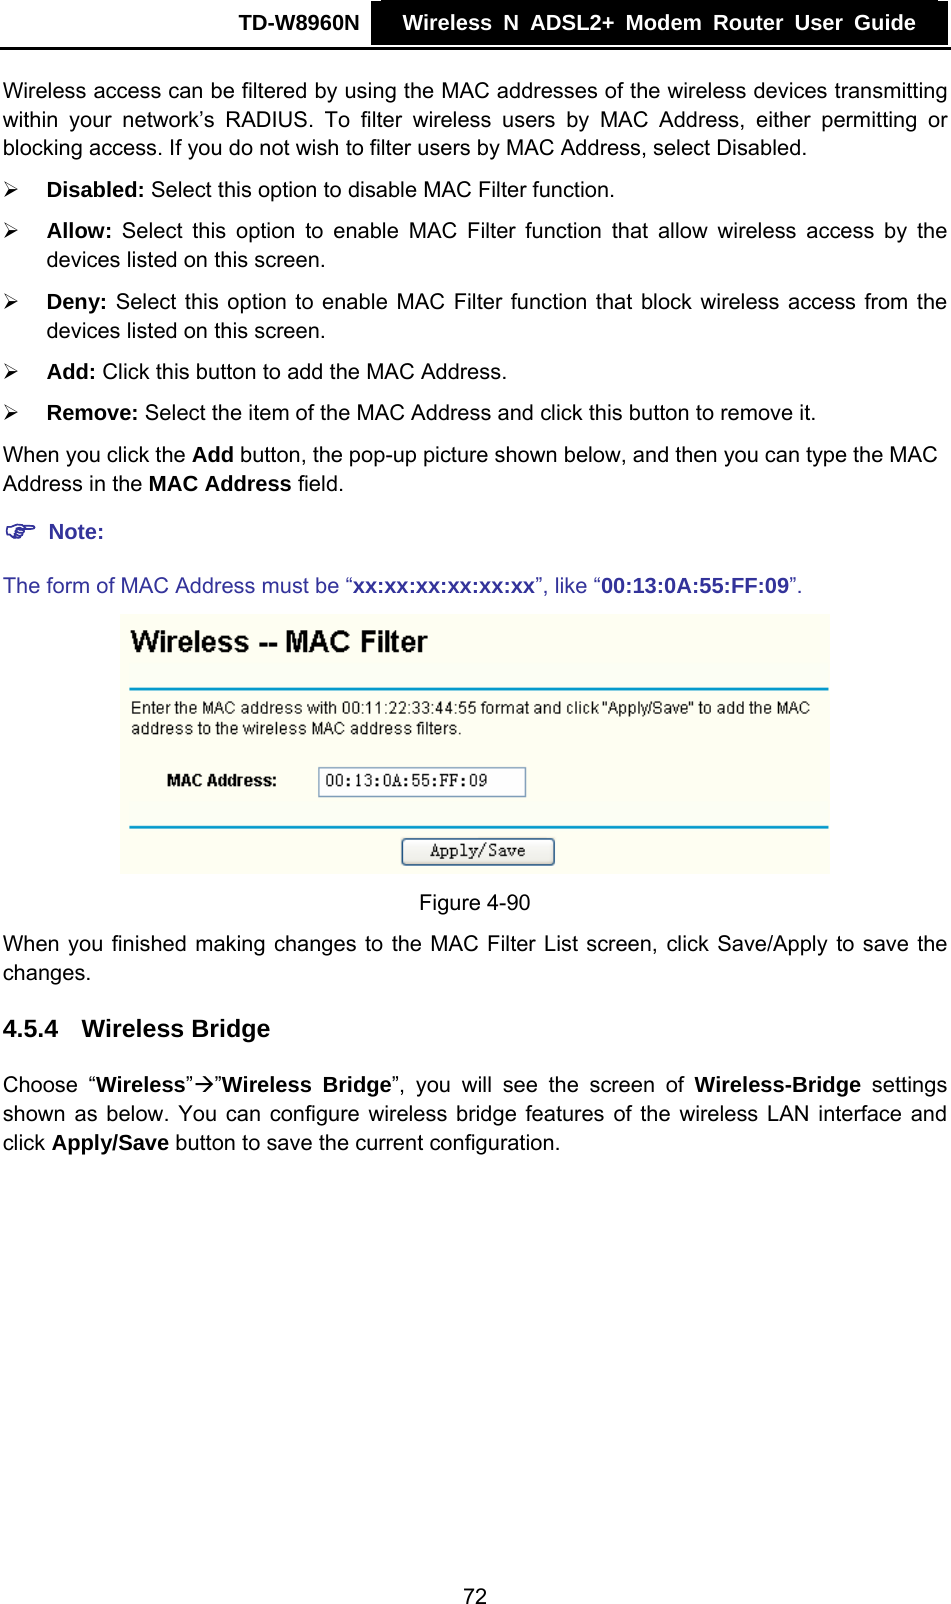 TD-W8960N    Wireless N ADSL2+ Modem Router User Guide    Wireless access can be filtered by using the MAC addresses of the wireless devices transmitting within your network’s RADIUS. To filter wireless users by MAC Address, either permitting or blocking access. If you do not wish to filter users by MAC Address, select Disabled. ¾ Disabled: Select this option to disable MAC Filter function. ¾ Allow: Select this option to enable MAC Filter function that allow wireless access by the devices listed on this screen. ¾ Deny: Select this option to enable MAC Filter function that block wireless access from the devices listed on this screen. ¾ Add: Click this button to add the MAC Address. ¾ Remove: Select the item of the MAC Address and click this button to remove it. When you click the Add button, the pop-up picture shown below, and then you can type the MAC Address in the MAC Address field. ) Note: The form of MAC Address must be “xx:xx:xx:xx:xx:xx”, like “00:13:0A:55:FF:09”.  Figure 4-90 When you finished making changes to the MAC Filter List screen, click Save/Apply to save the changes. 4.5.4  Wireless Bridge Choose “Wireless”Æ”Wireless Bridge”, you will see the screen of Wireless-Bridge settings shown as below. You can configure wireless bridge features of the wireless LAN interface and click Apply/Save button to save the current configuration. 72 